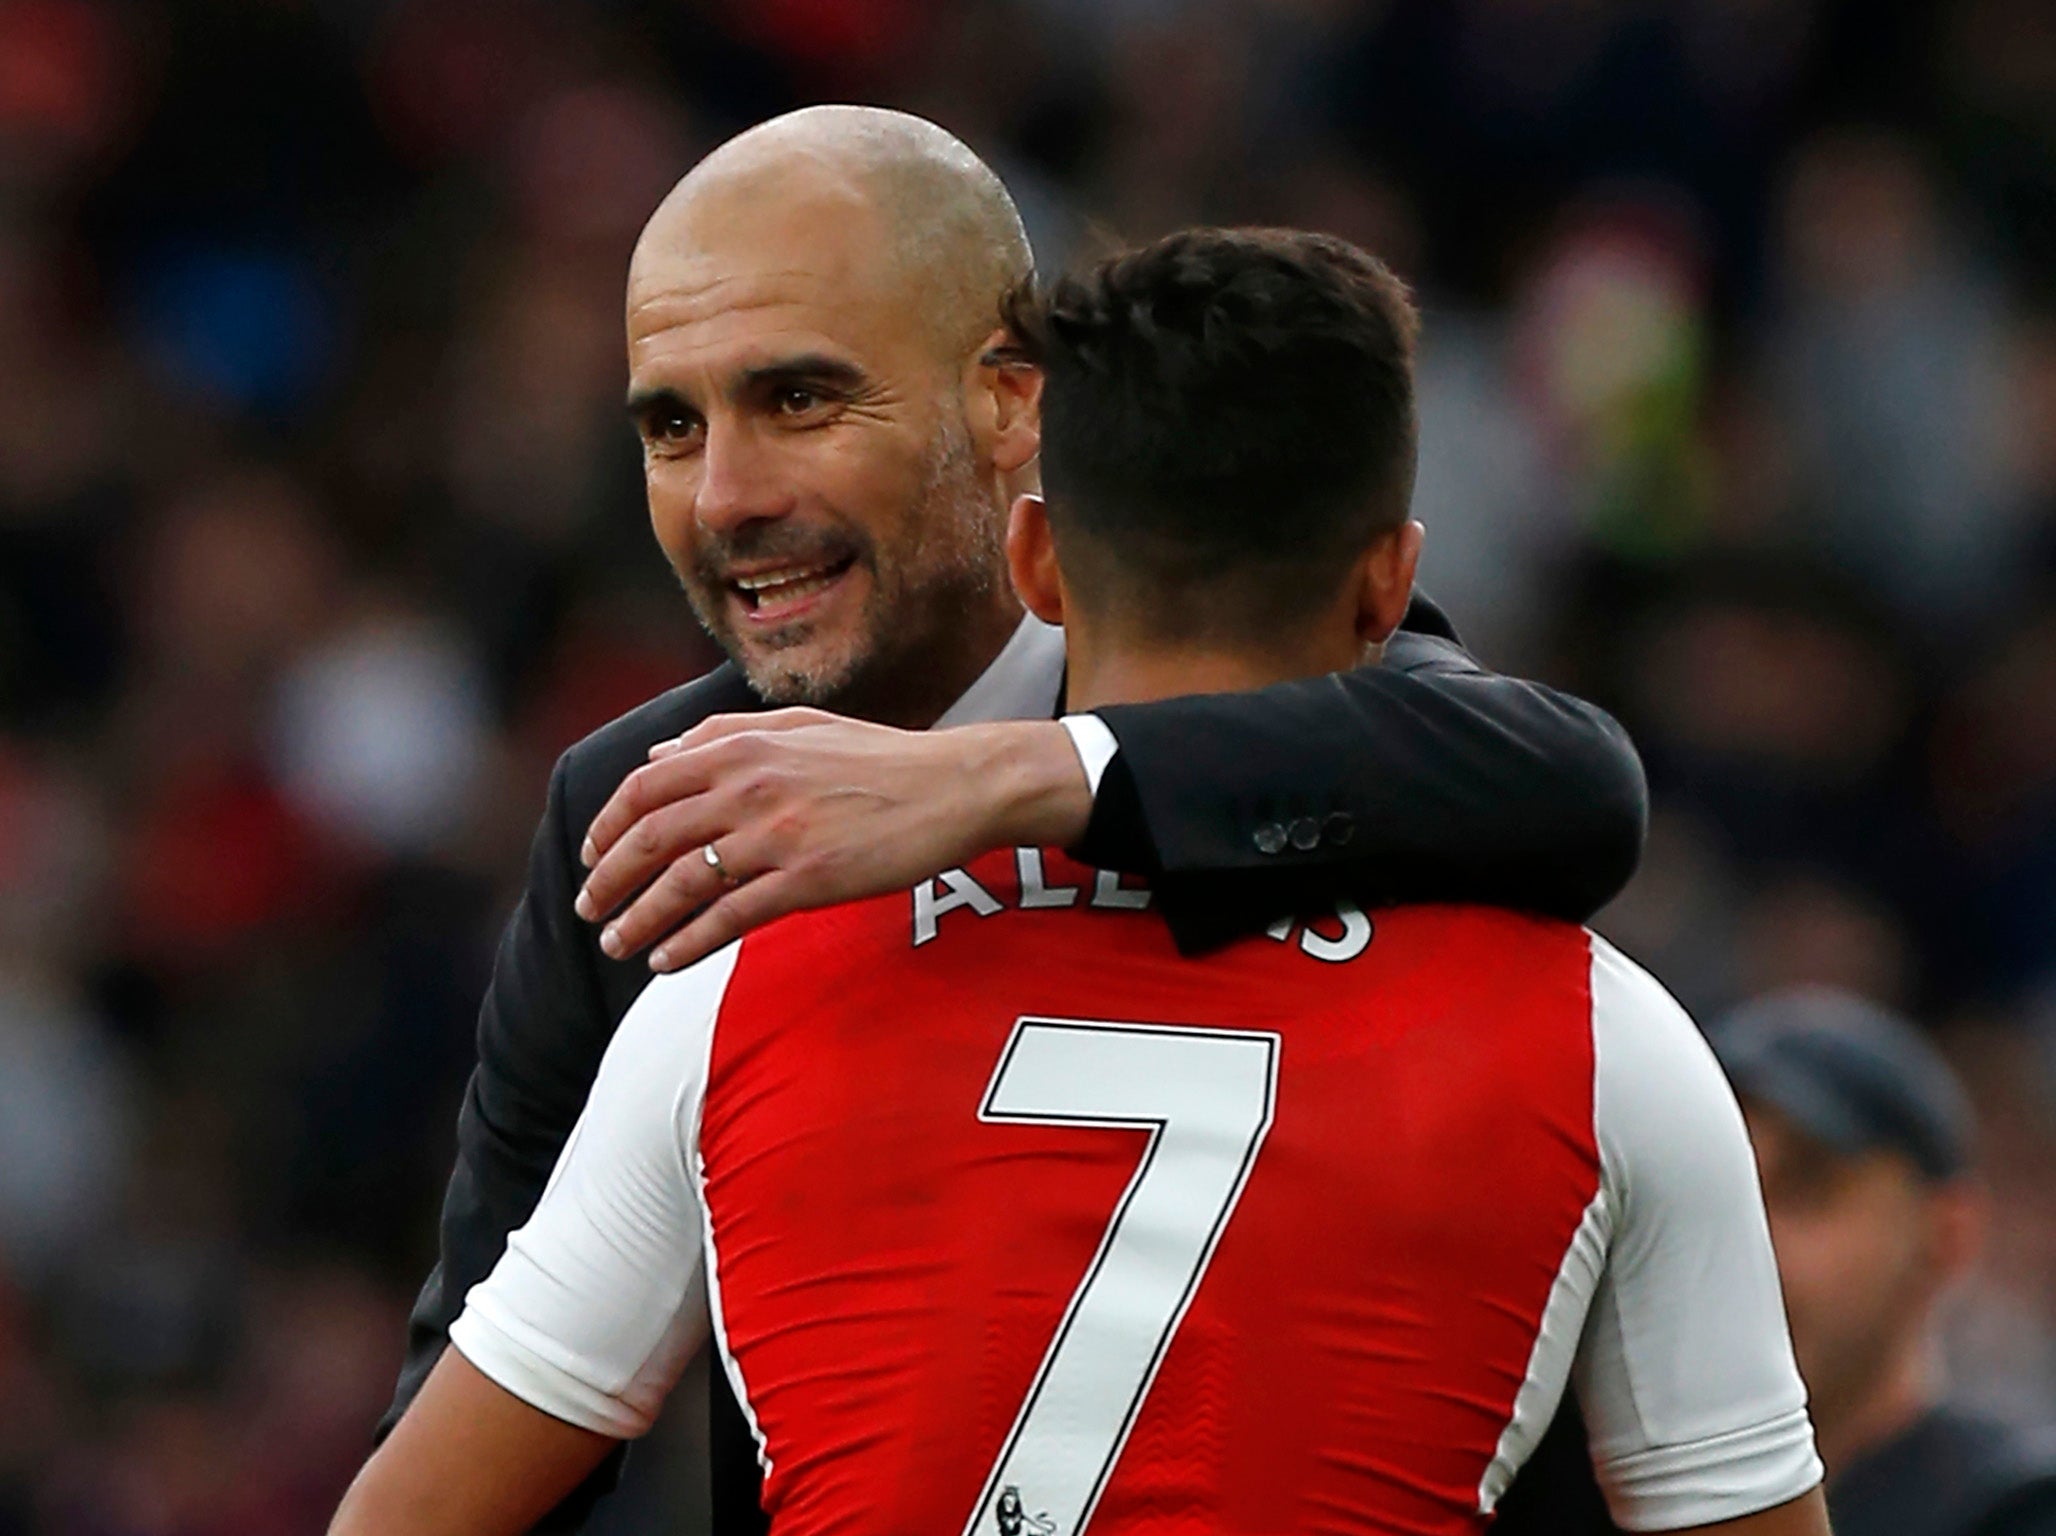 Pep Guardiola and Alexis Sanchez could soon be reunited at Manchester City